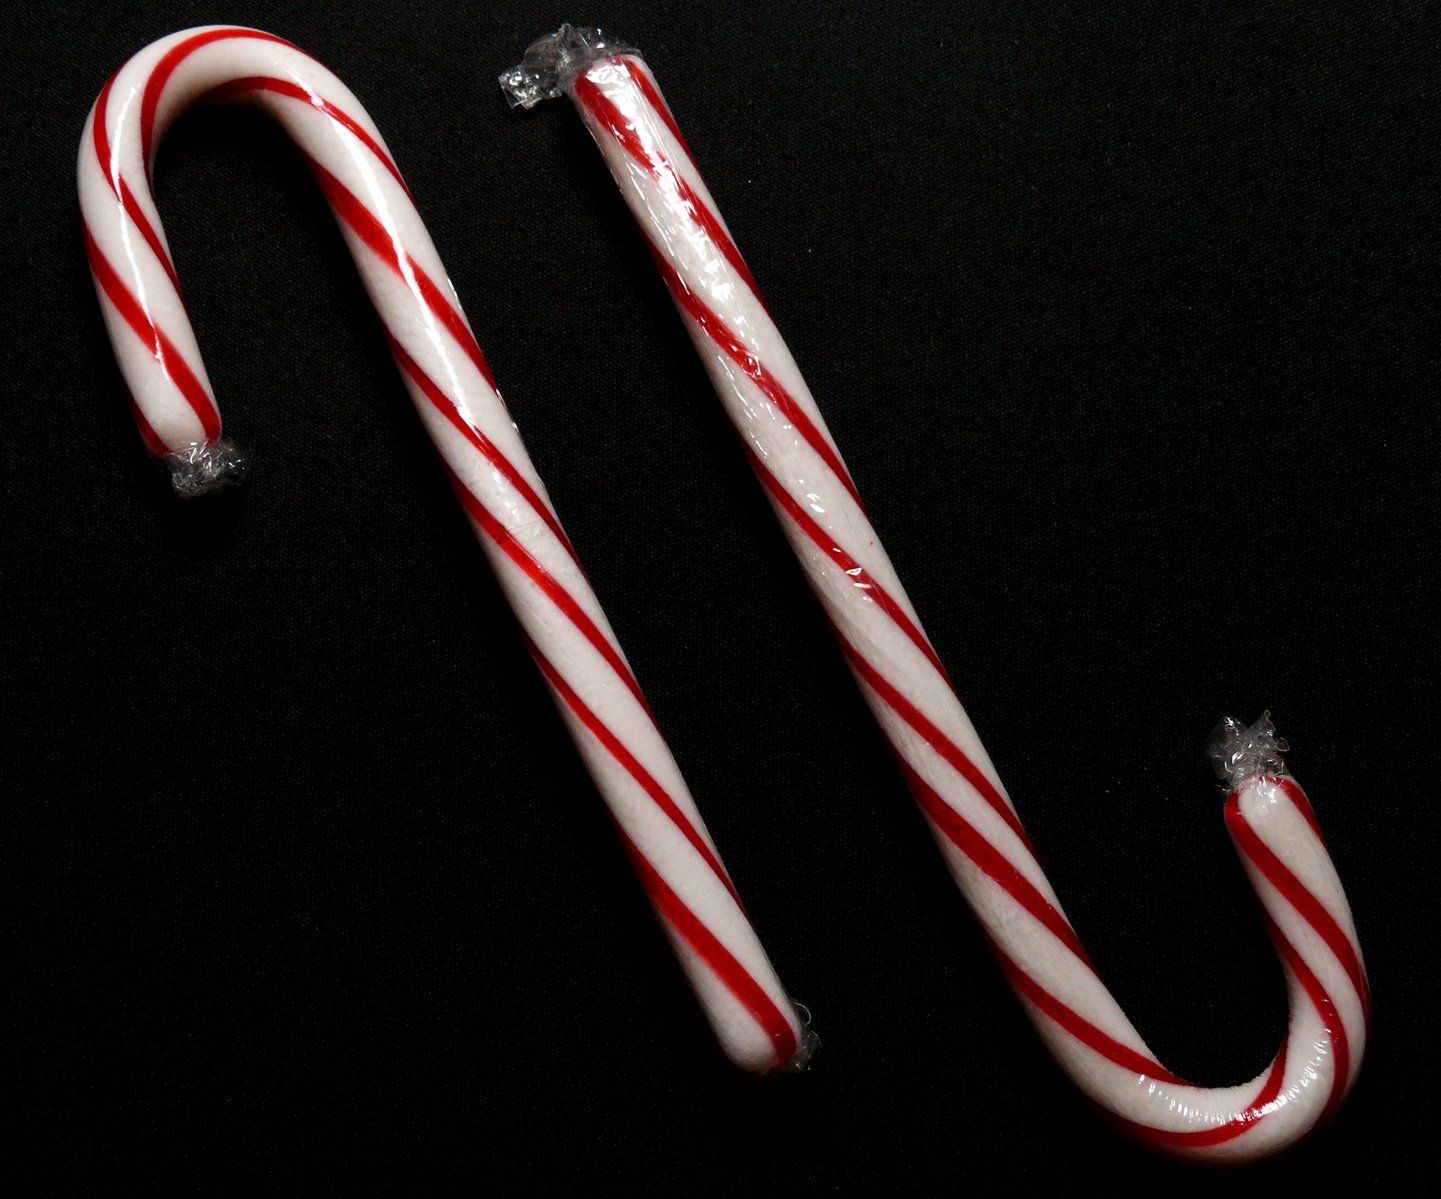 two candy canes with melted red stripes next to each other